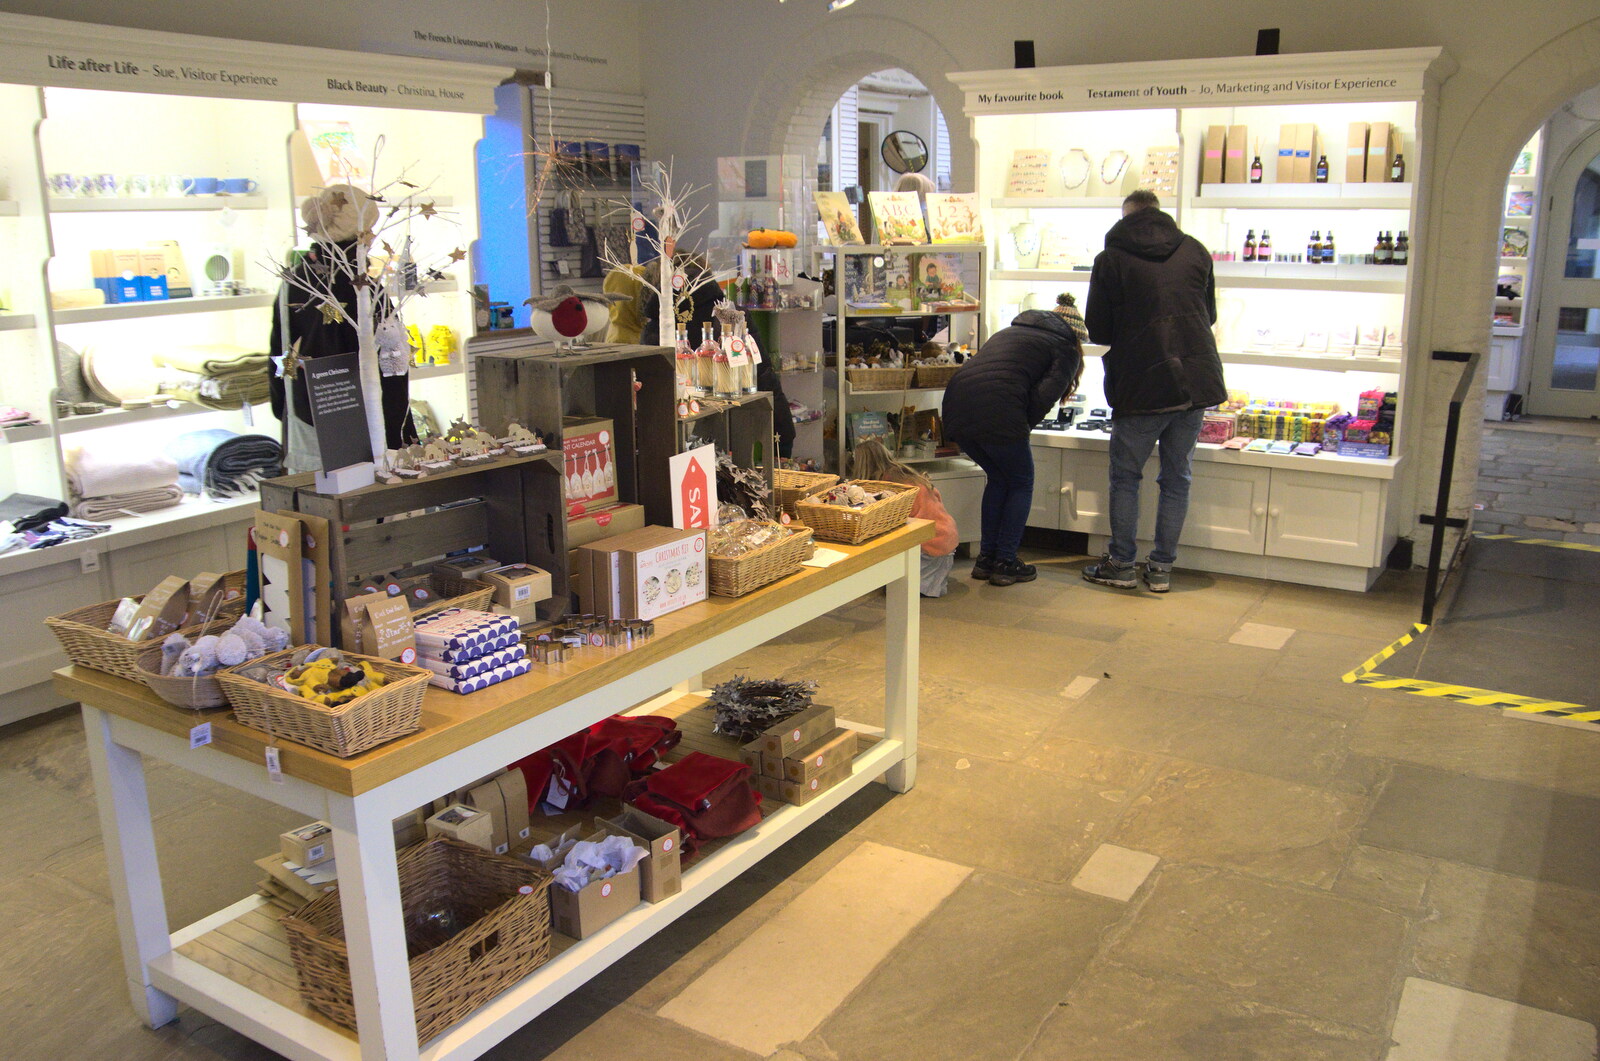 Inside the NT shop from A Visit to Blickling Hall, Aylsham, Norfolk - 9th January 2022